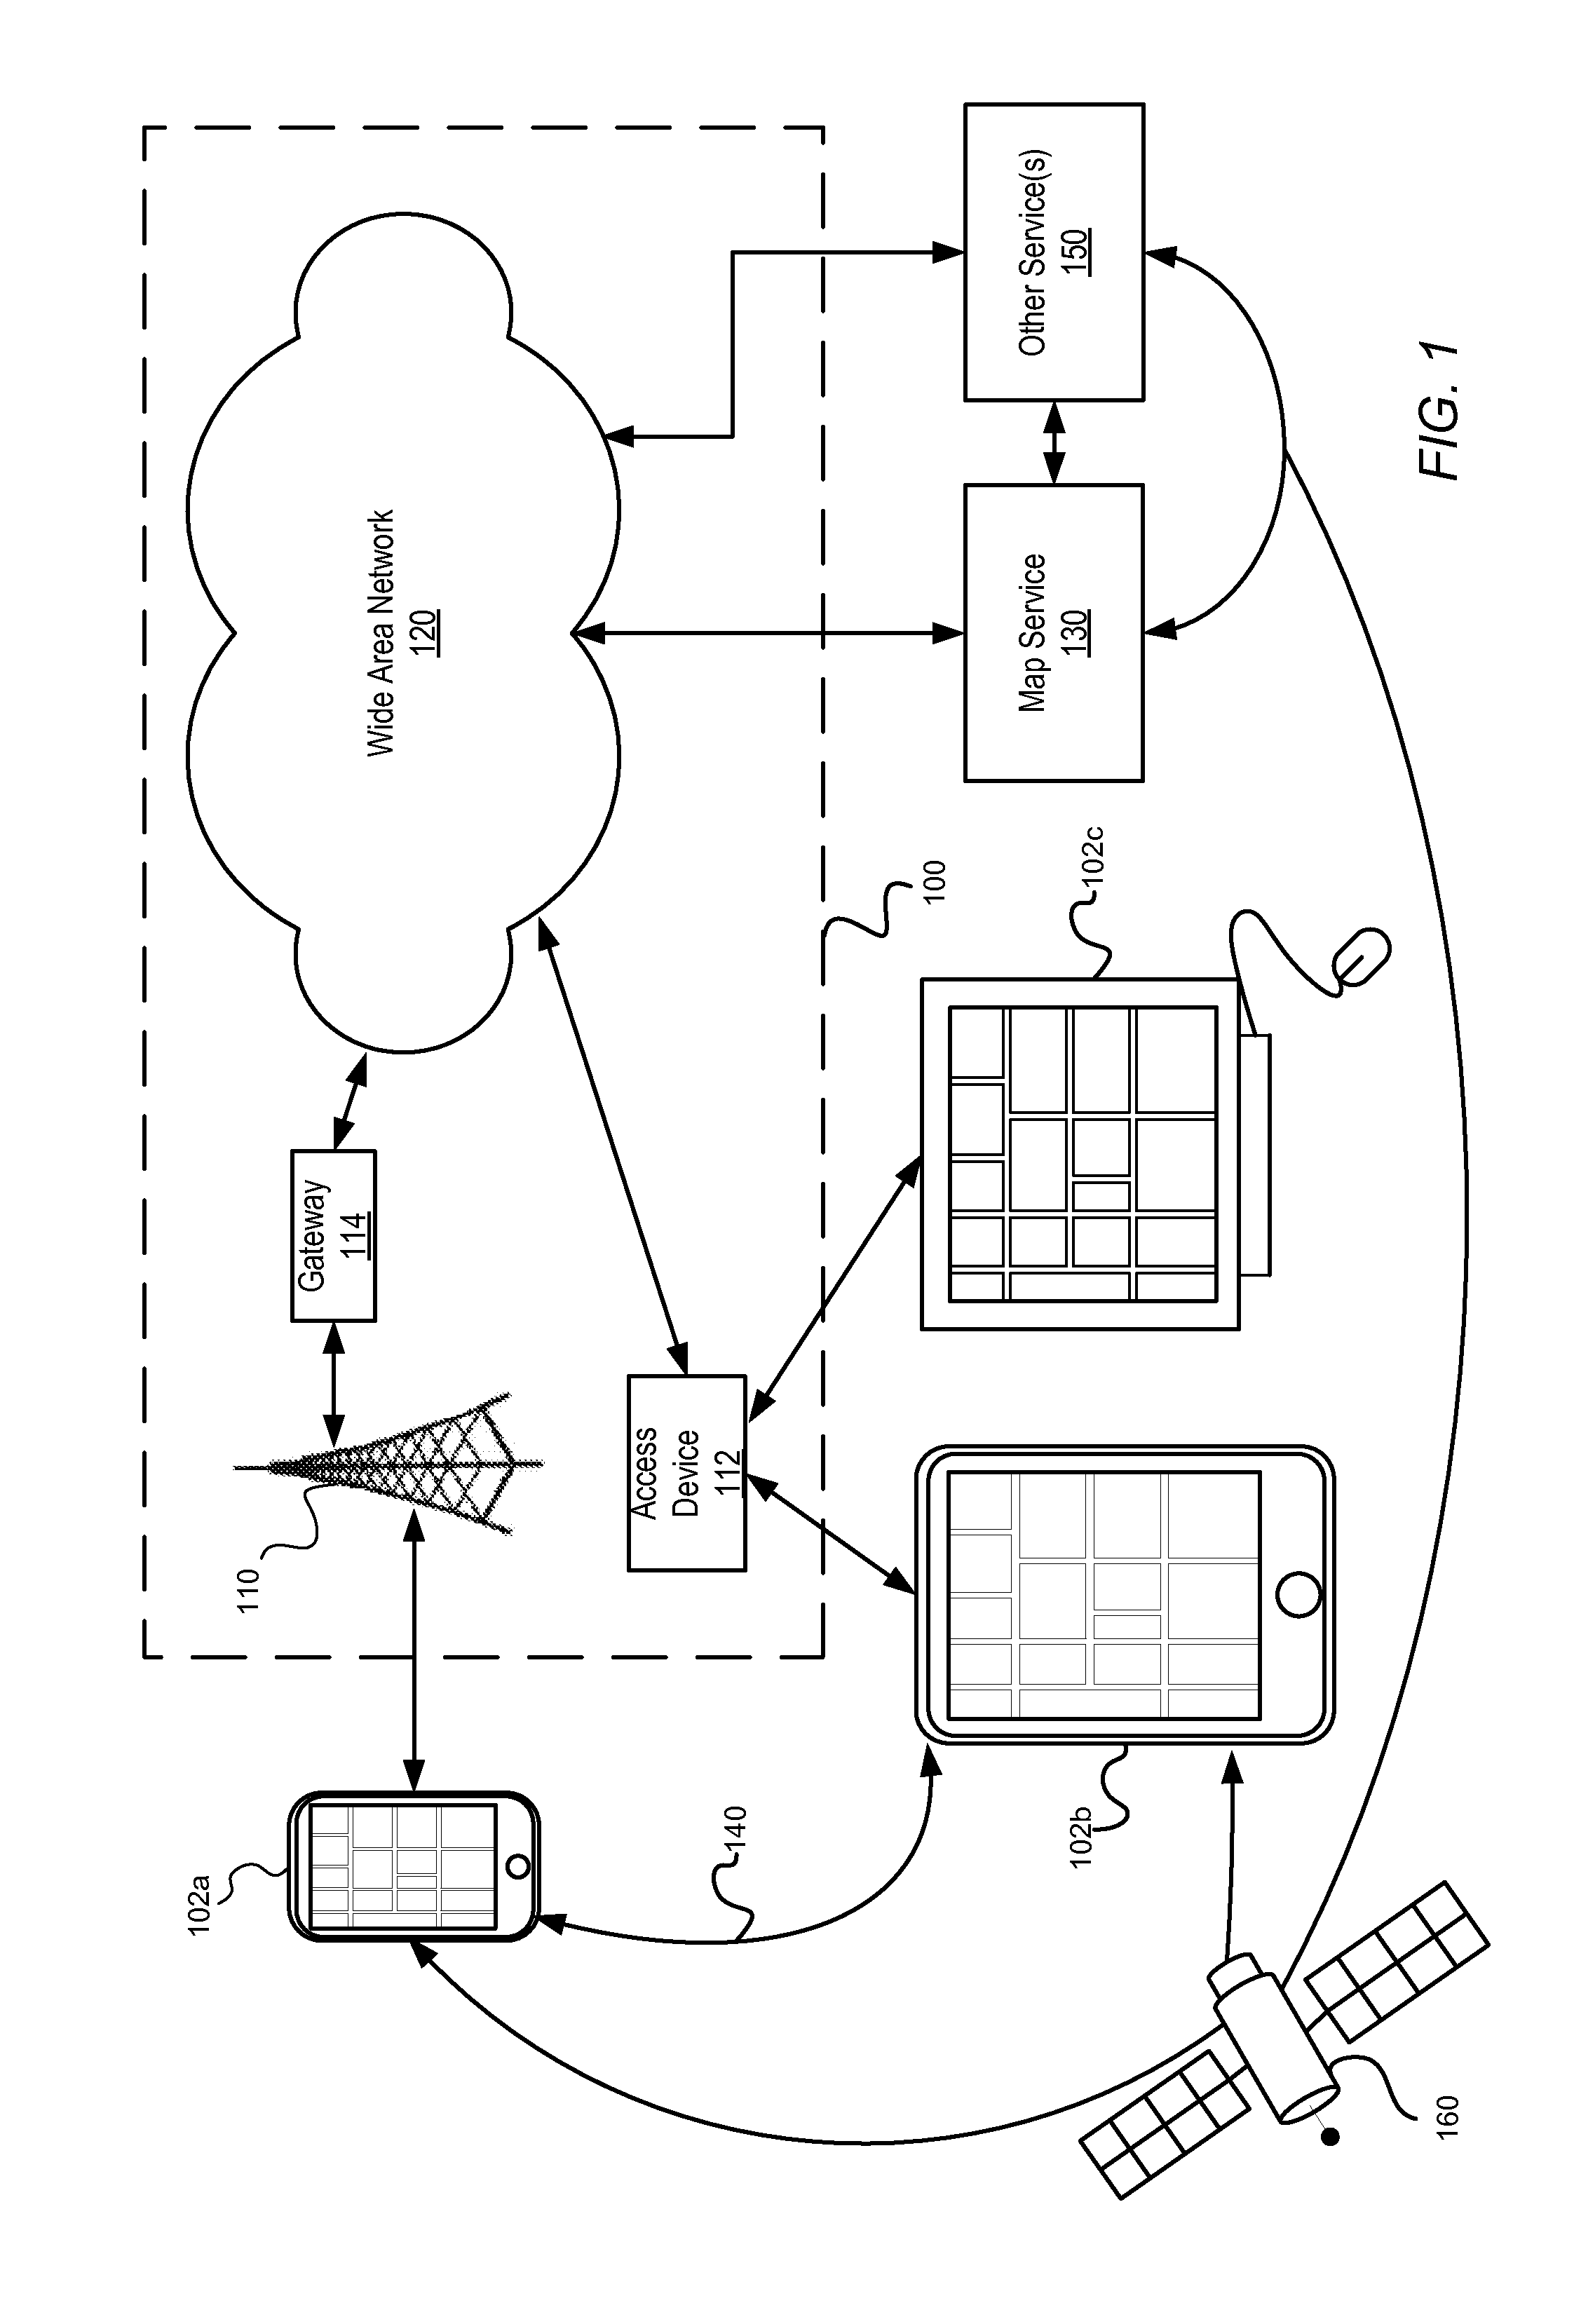 Method, system and apparatus for rendering a map according to hybrid map data